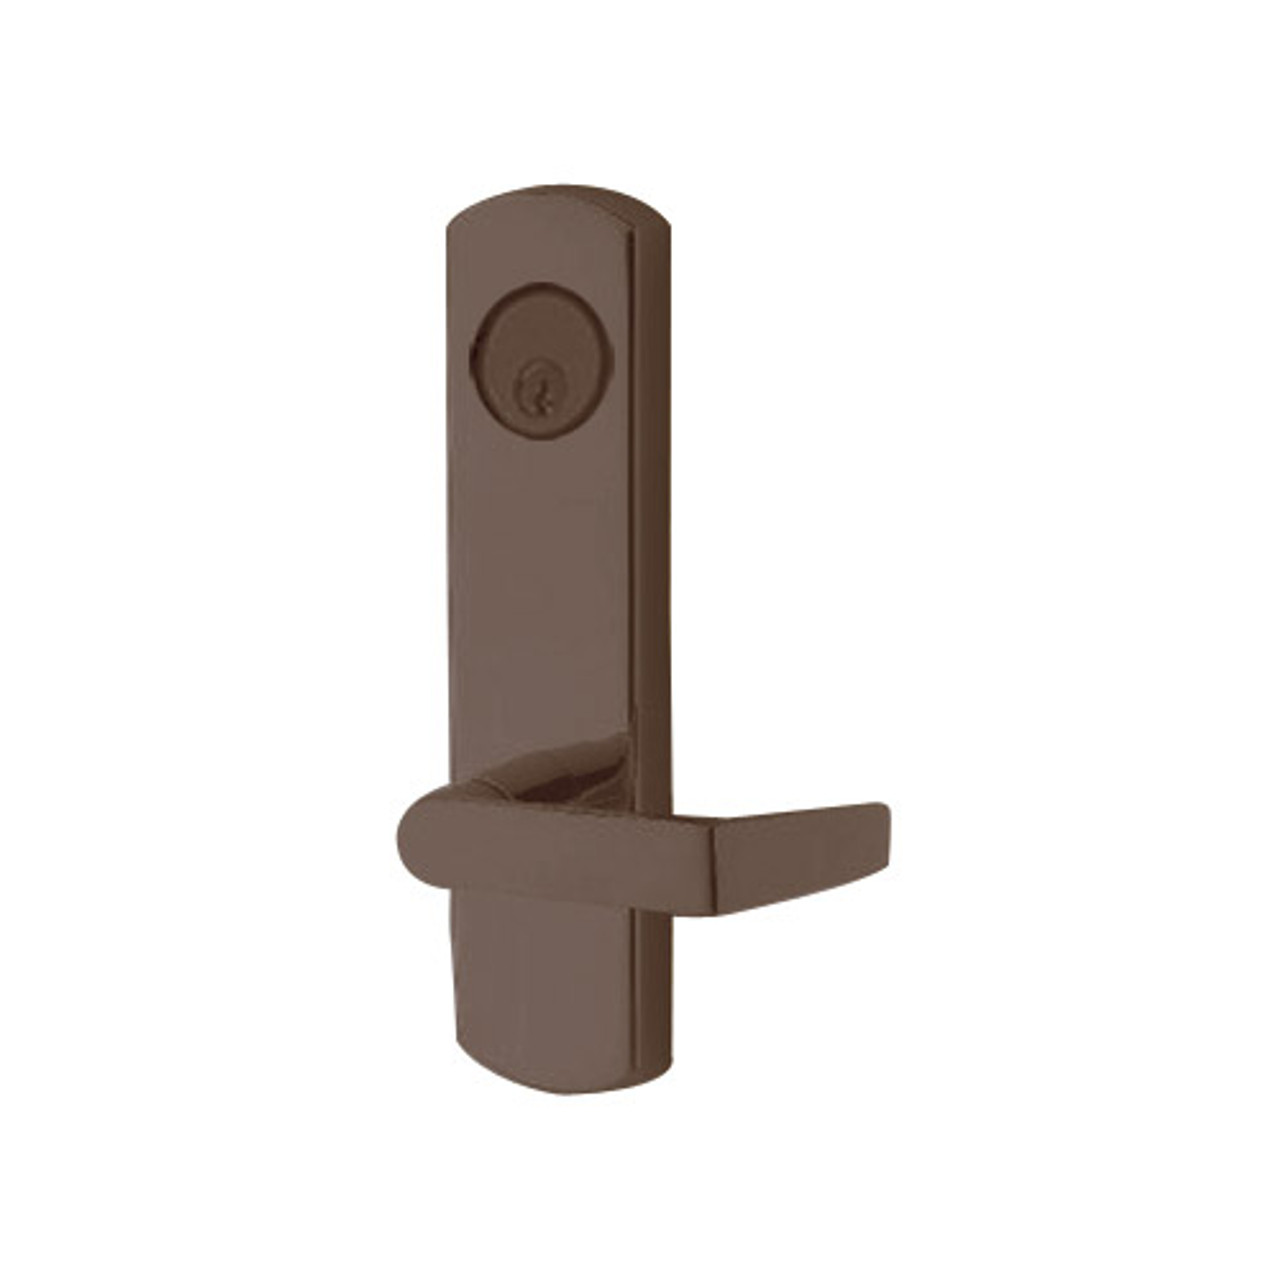 3080-03-0-31-US10B Adams Rite Standard Entry Trim with Square Lever in Oil Rubbed Bronze Finish